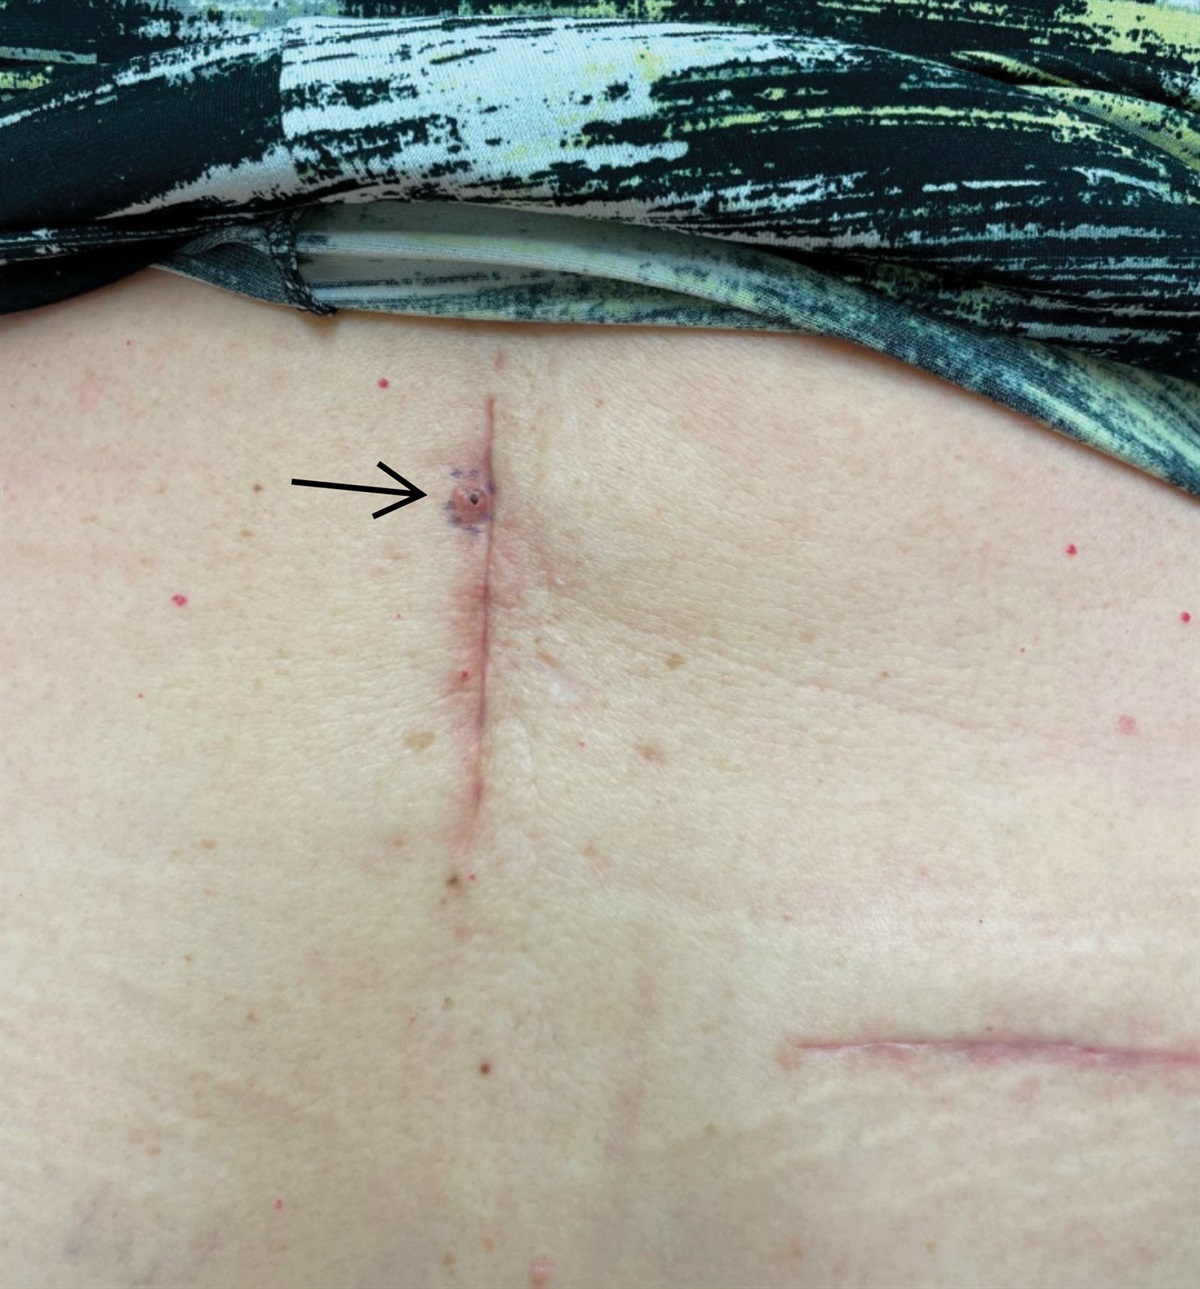 Basal Cell Carcinoma Formation Within A Spinal Cord Stimulator Surgical Scar: A Case Report